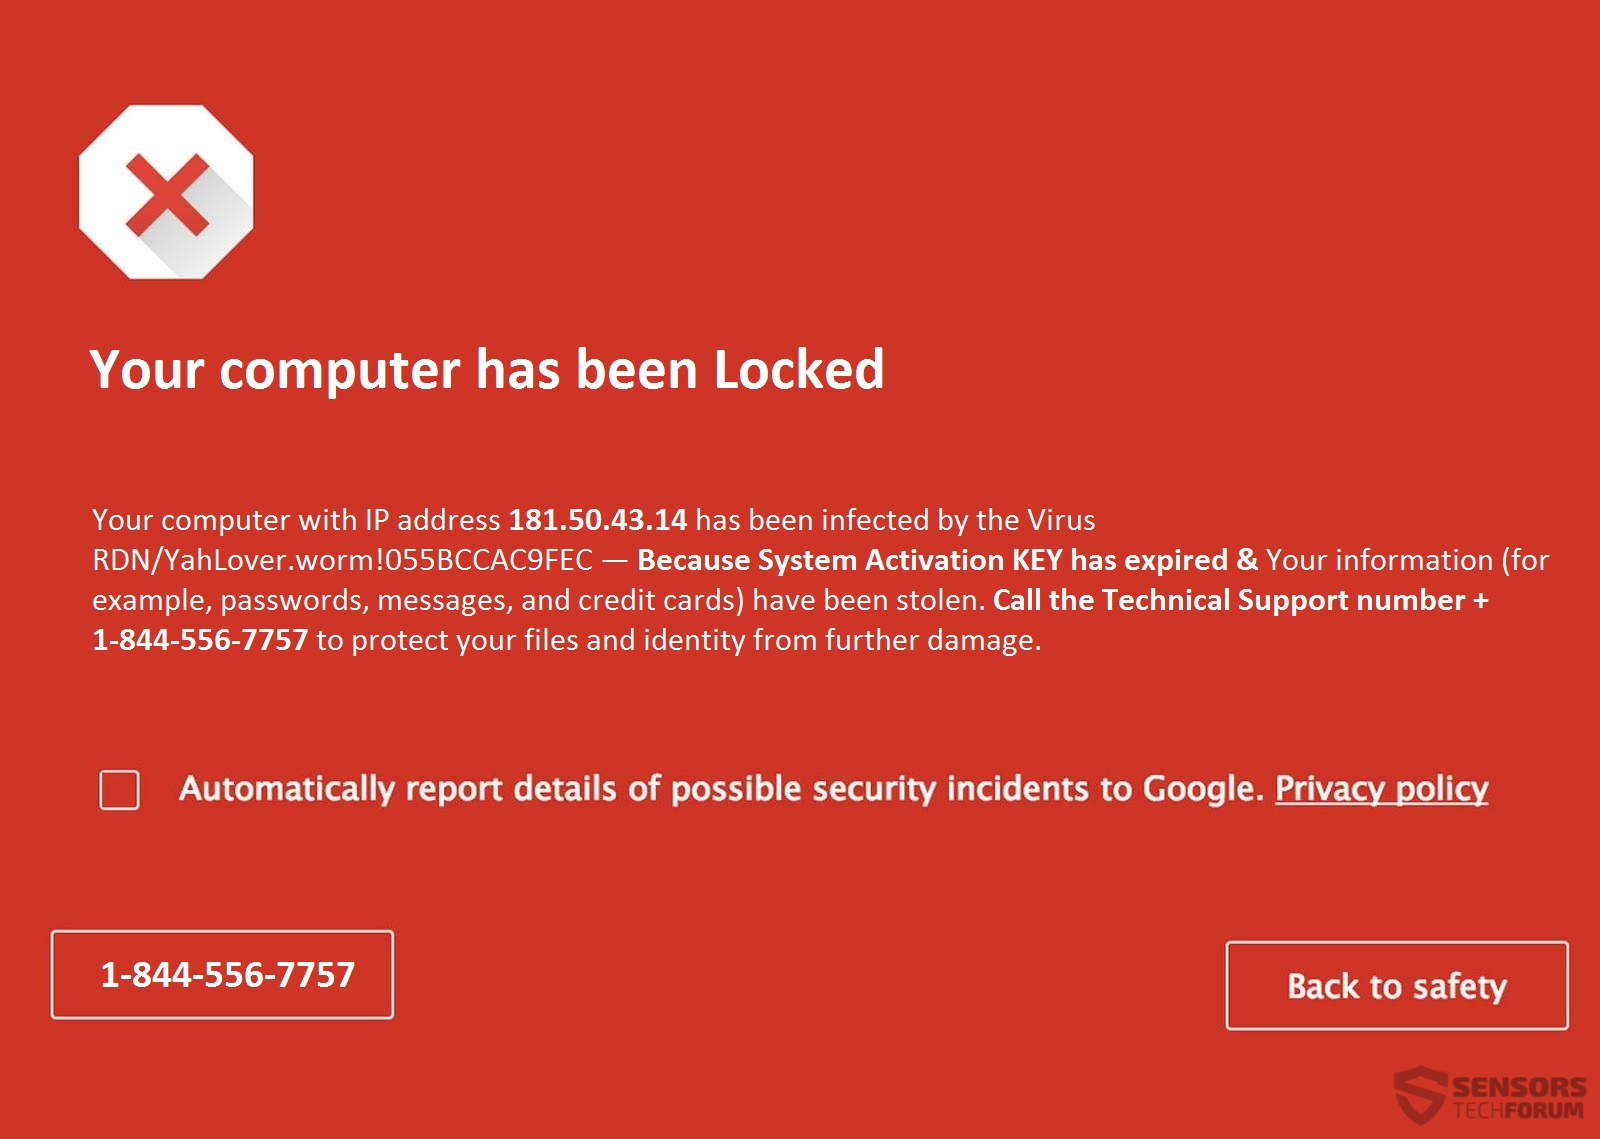 stf-your-computer-has-been-locked-google-malicioso-activity-phishing-site-fake-screen